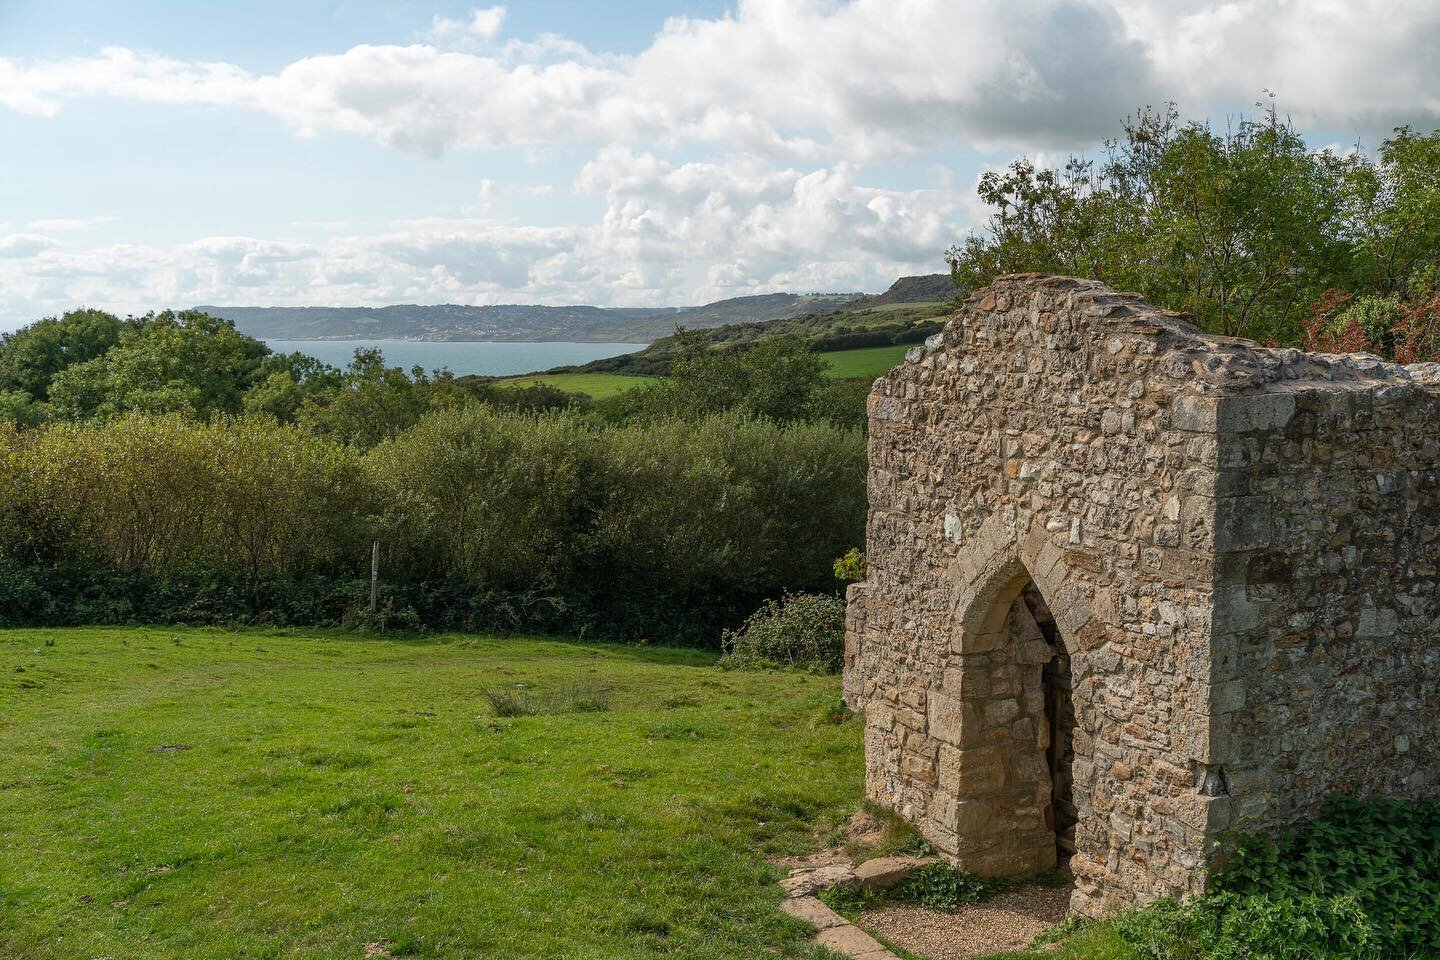 Taking Landscape photographers to The National Trust walks on the Dorset / Devon border at Stanton St. Gabriel.

Today the National Trust look after the ruin and have stabilised what is left of the old church which lies on the Jurassic Coast Path bet